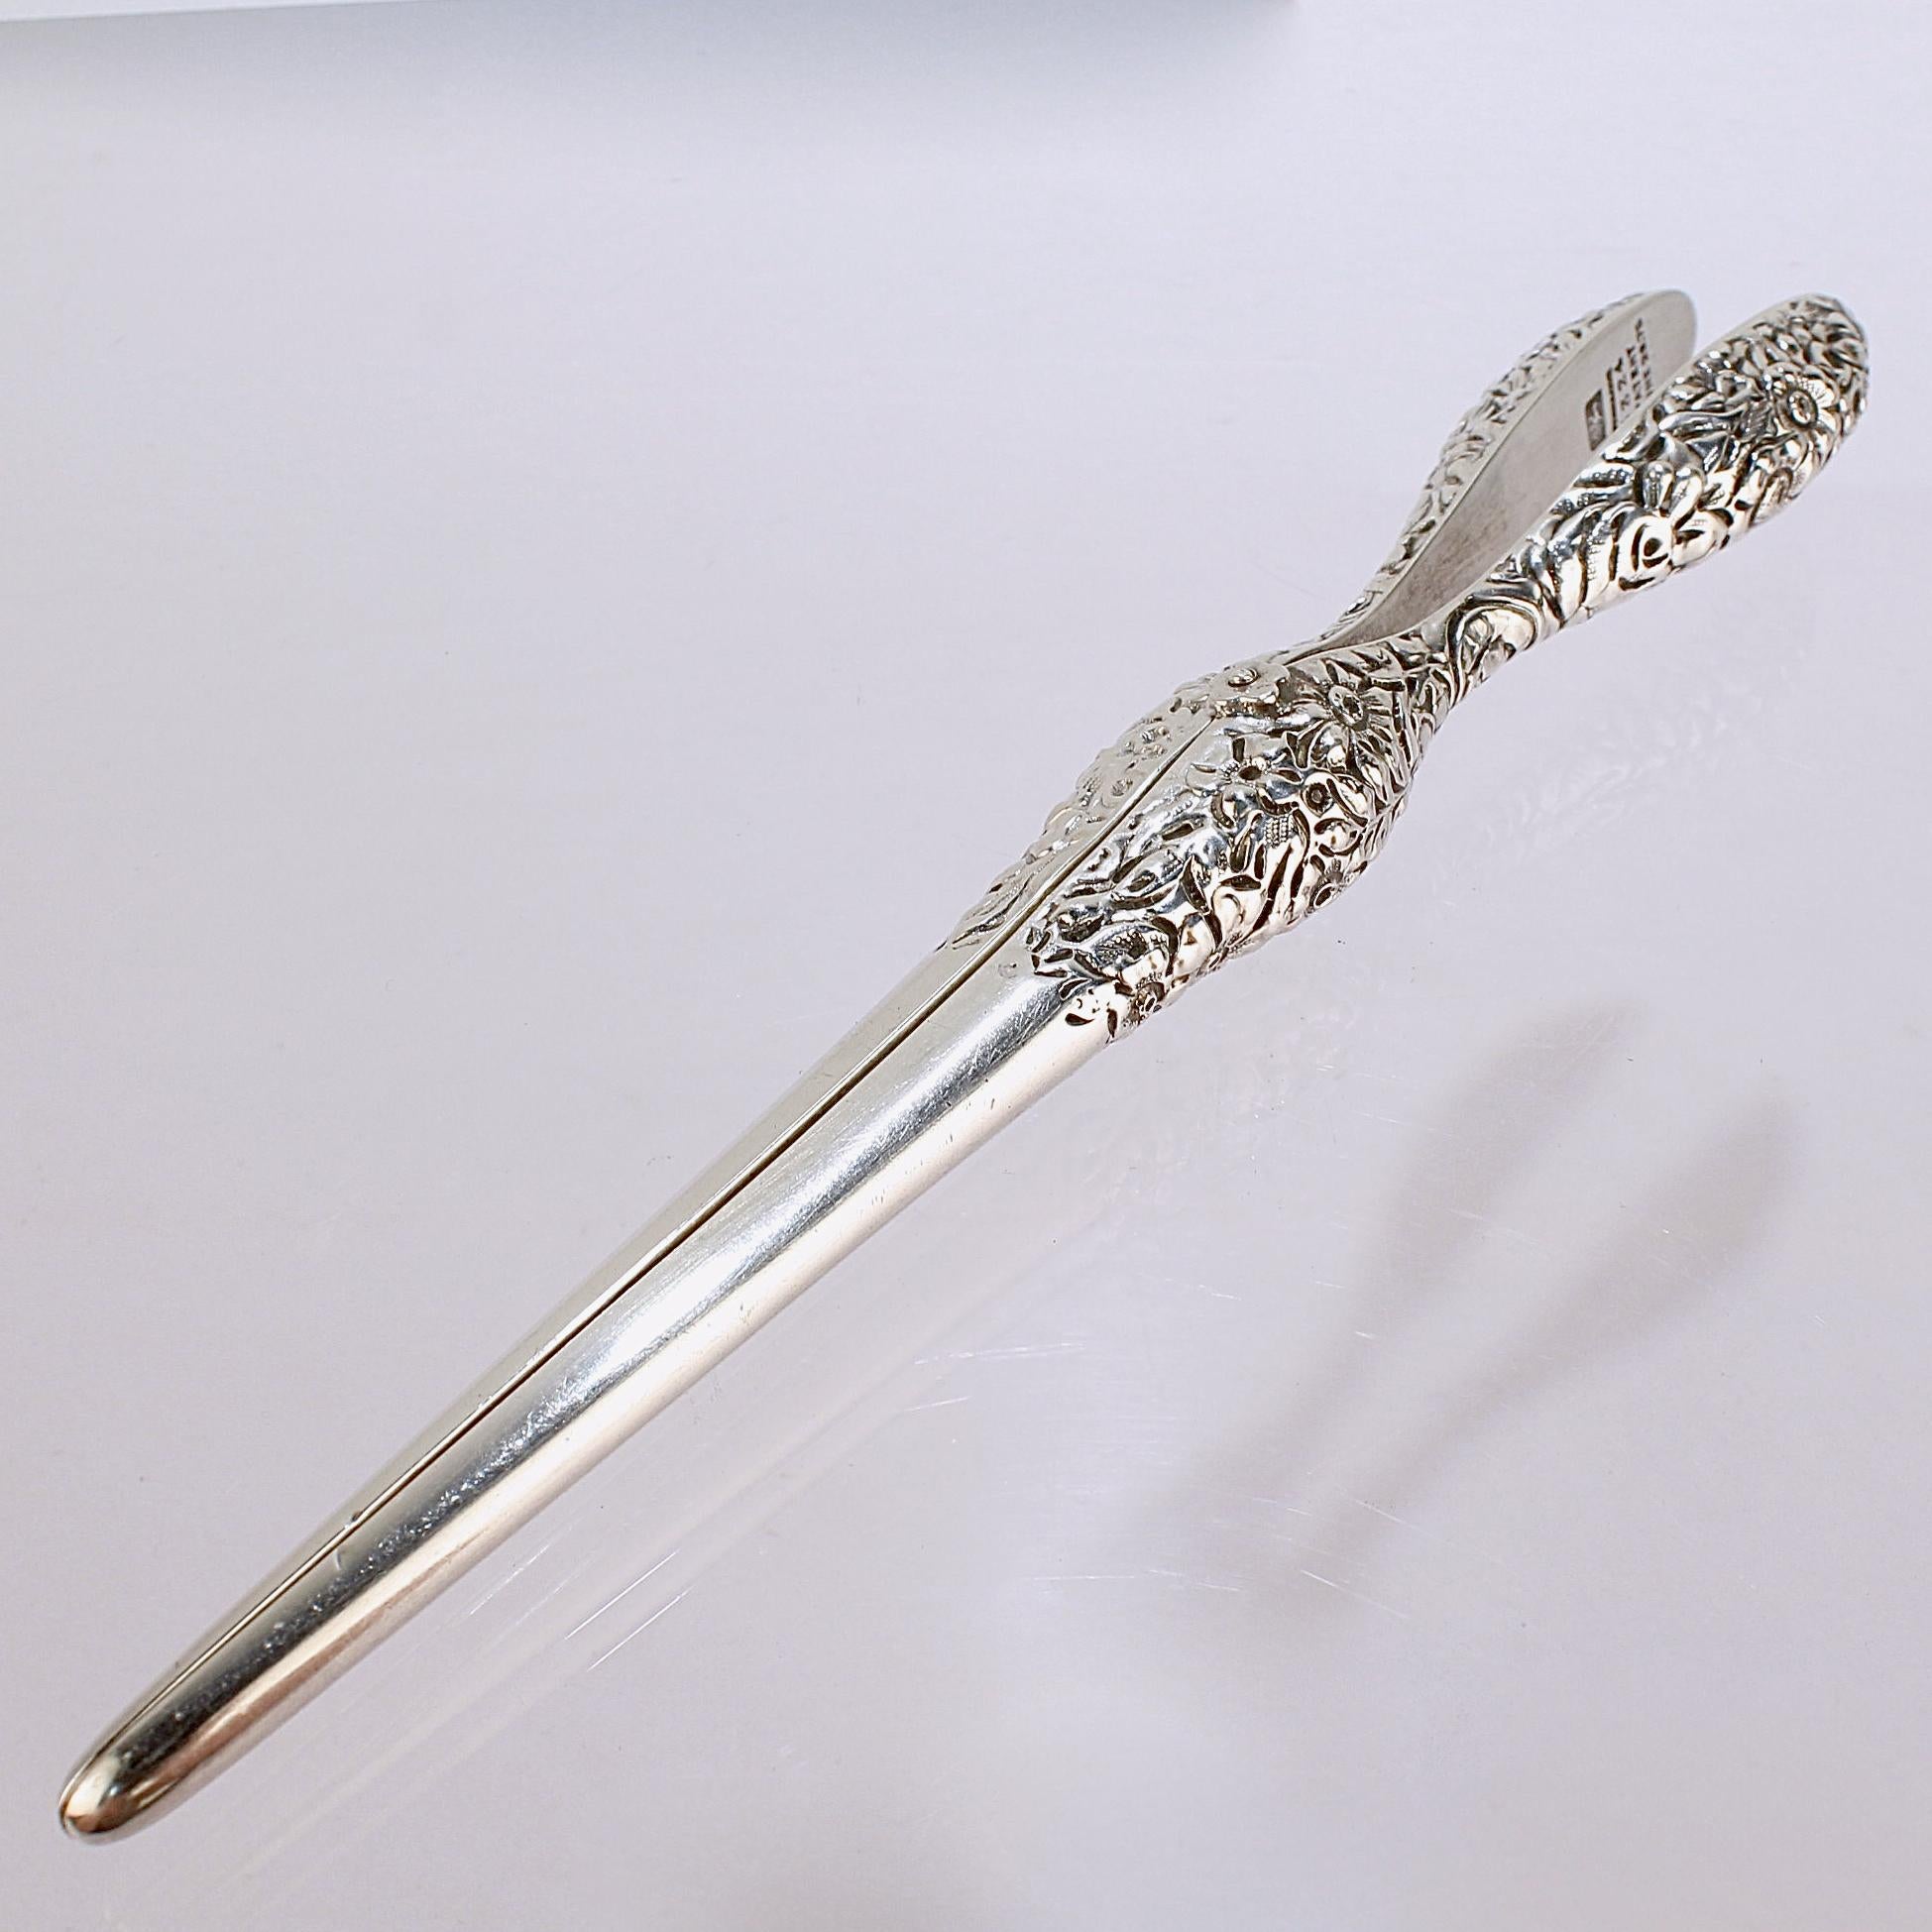 A fine antique Victorian glove stretcher.

In sterling silver with repoussé handles.

By Whiting and patent dated June 1875.

Simply an amazing piece of American Victorian silver by a top-shelf silver company!

Date:
Late 19th Century 

Overall